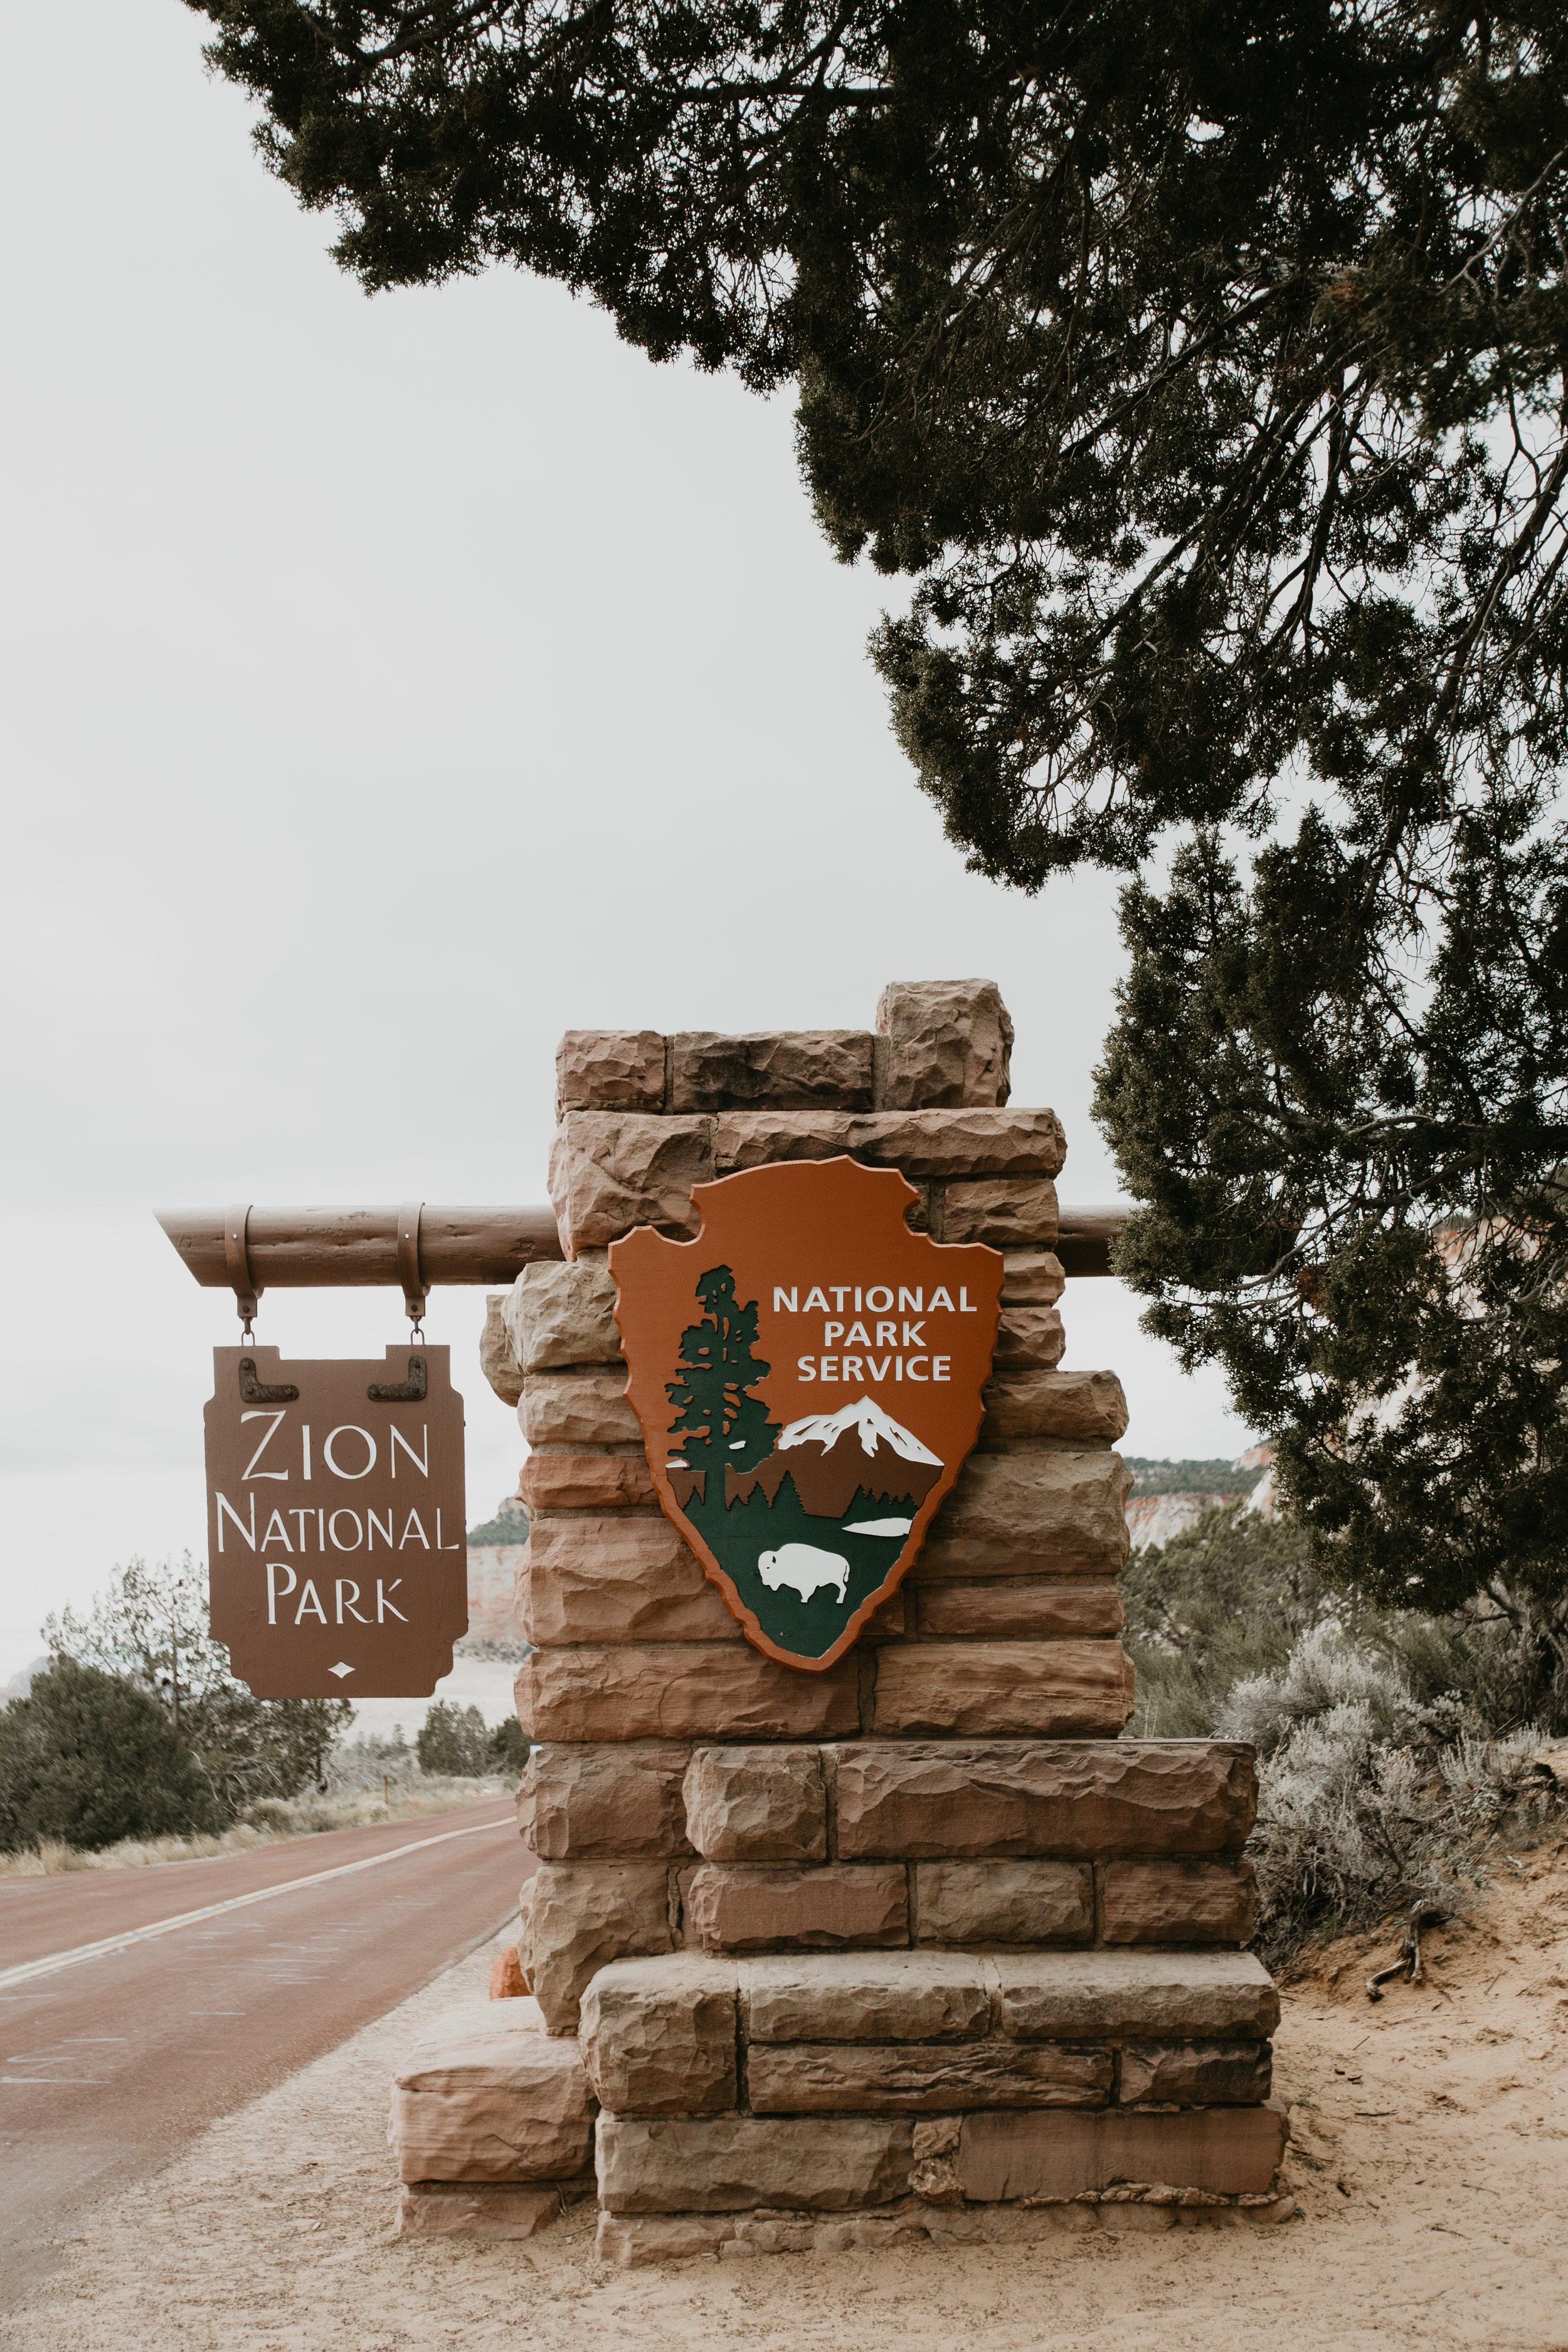 nicole-daacke-photography-zion-national-park-elopement-photographer-canyon-overlook-trail-elope-hiking-adventure-wedding-photos-fall-utah-red-rock-canyon-stgeorge-eloping-photographer-1.jpg